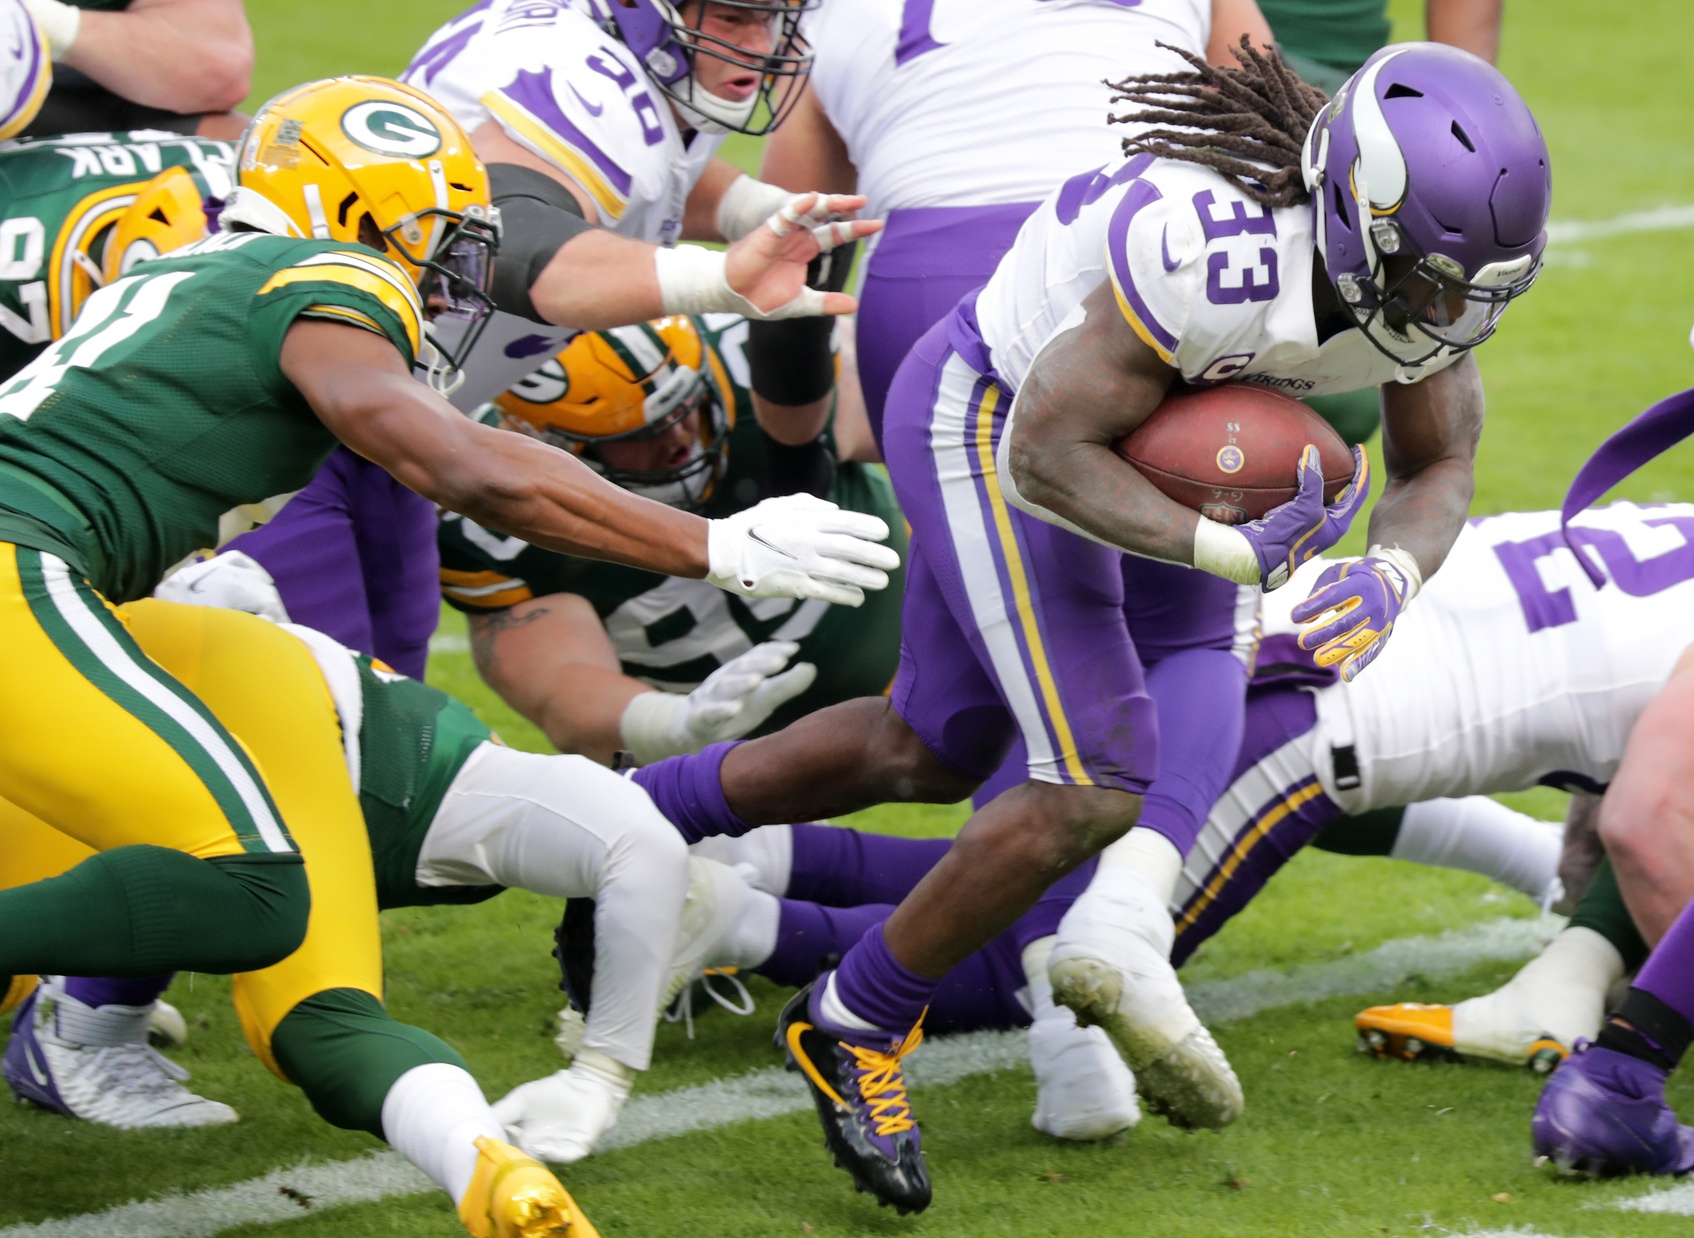 Vikings 'Minnesota Miracle:' How the hell did that happen